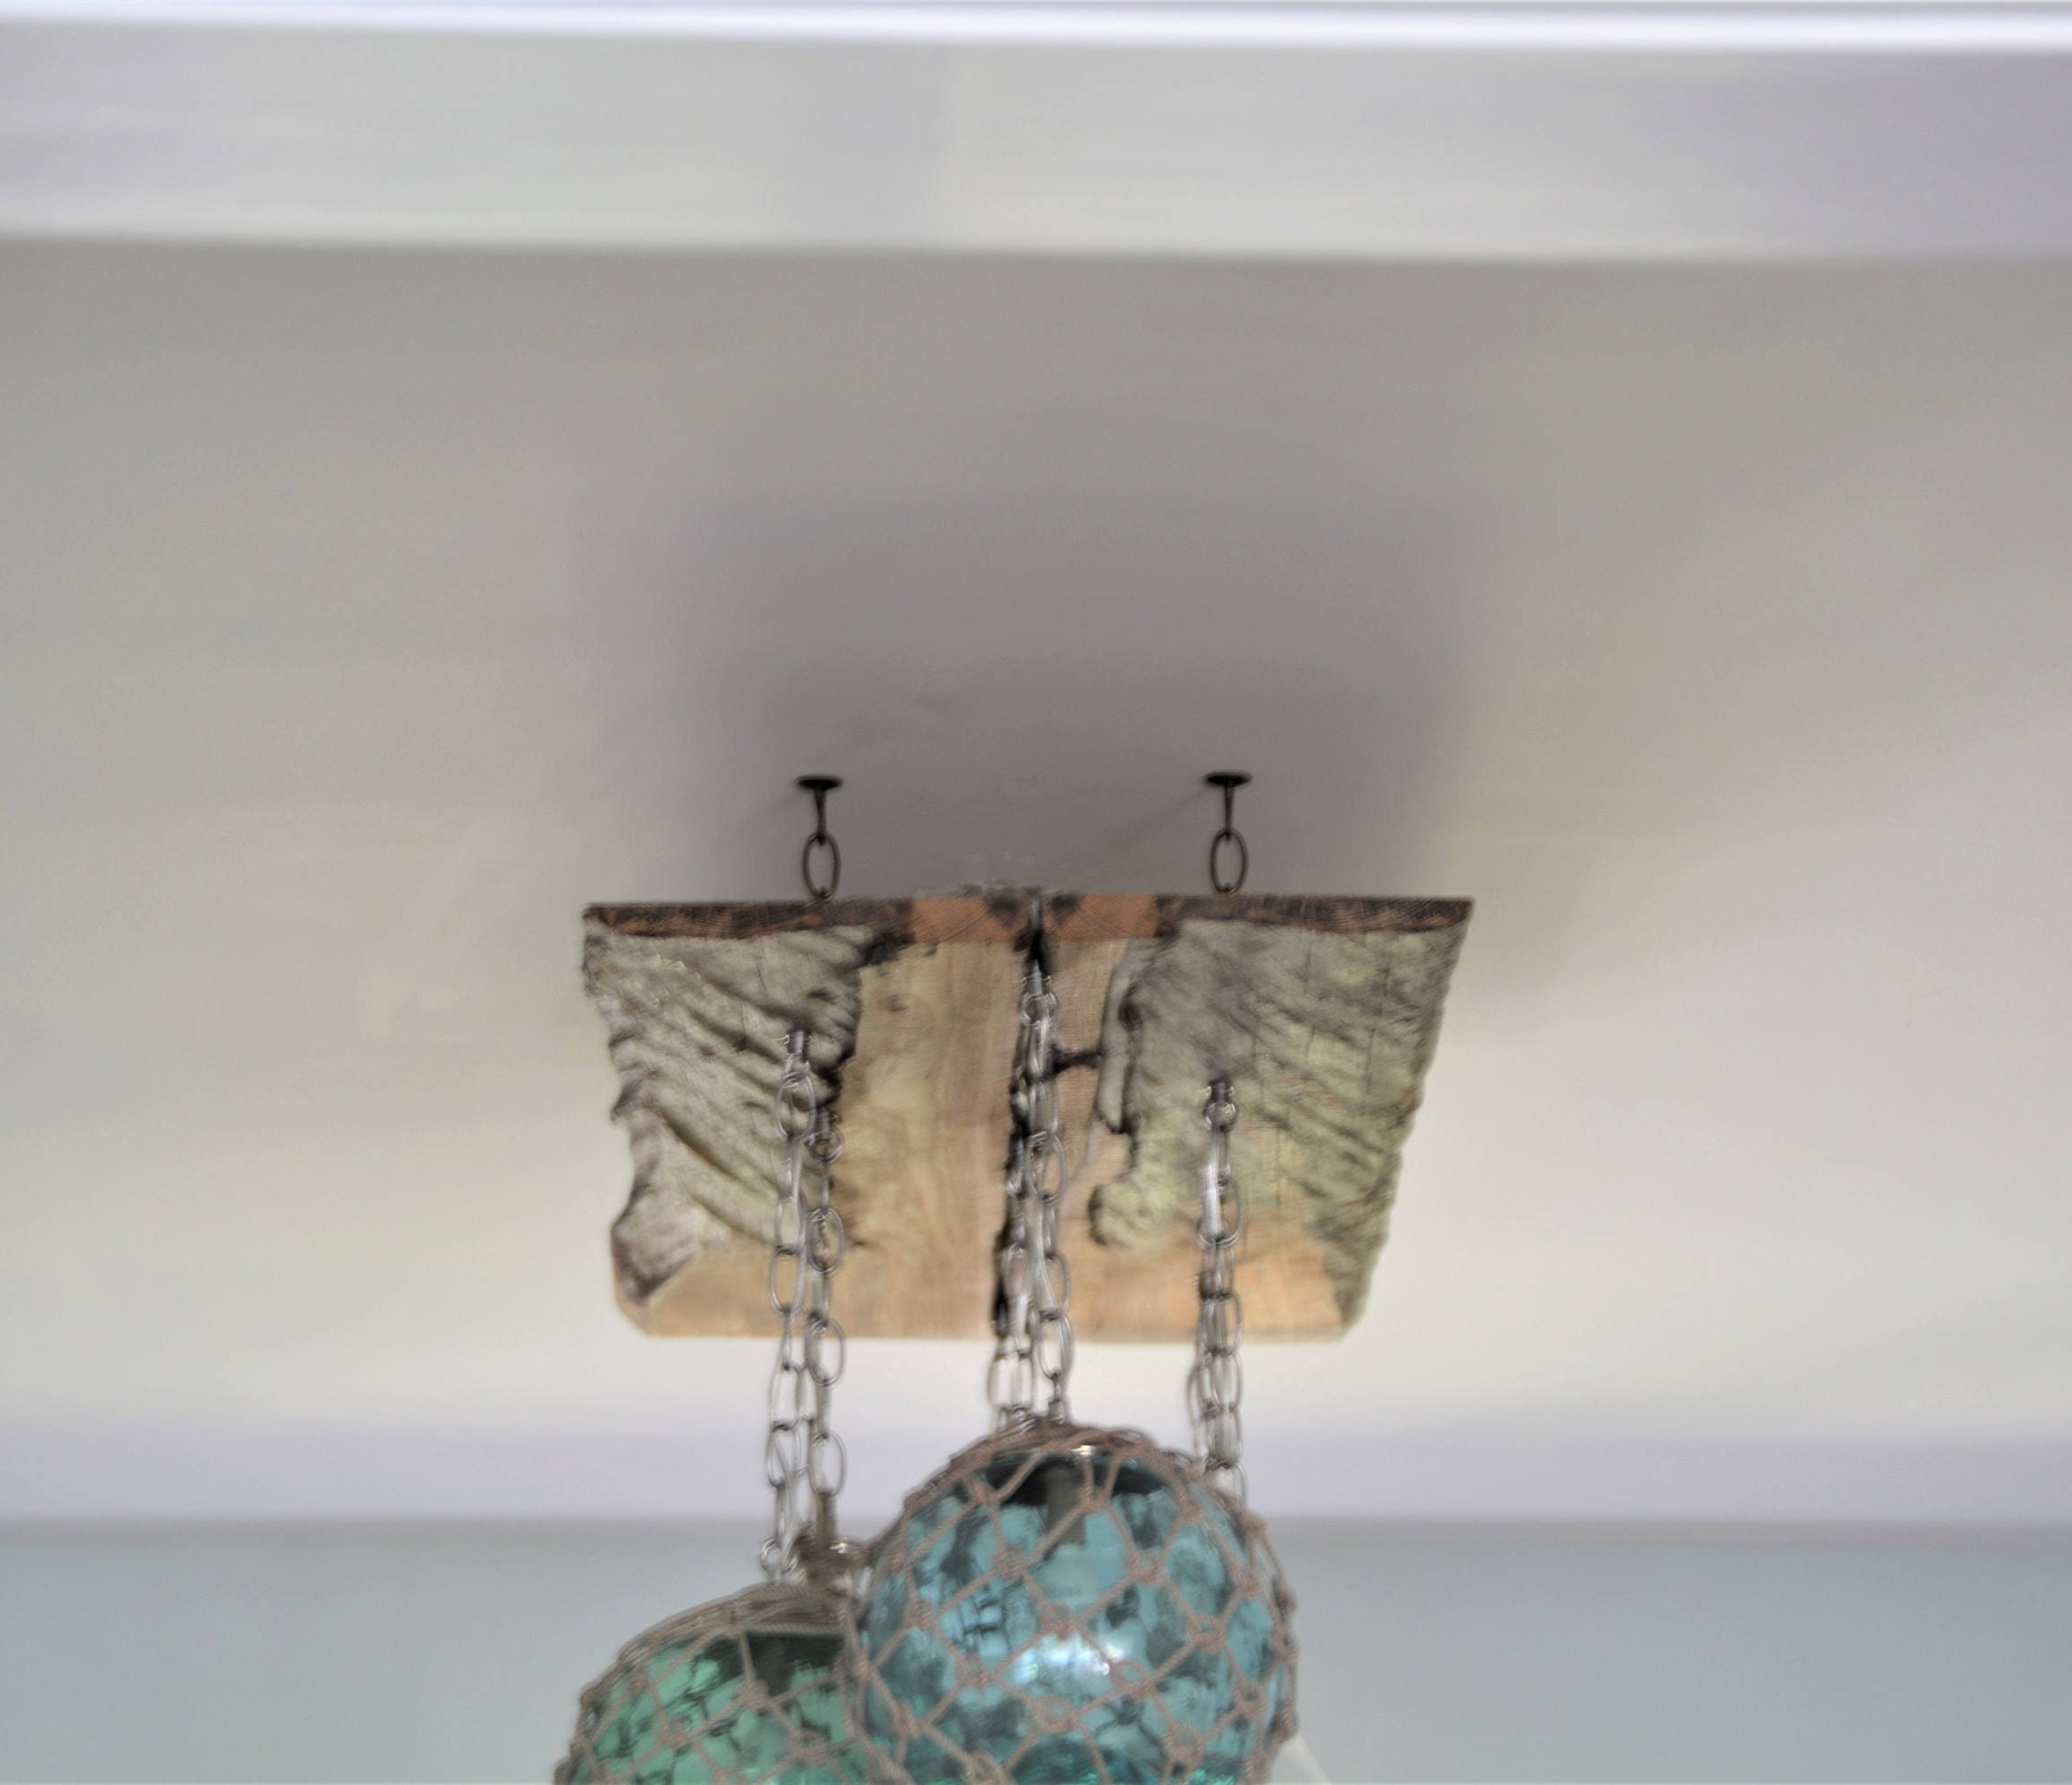 Glass Fishing Float Light Fixture, Chandelier With 7 Floats 